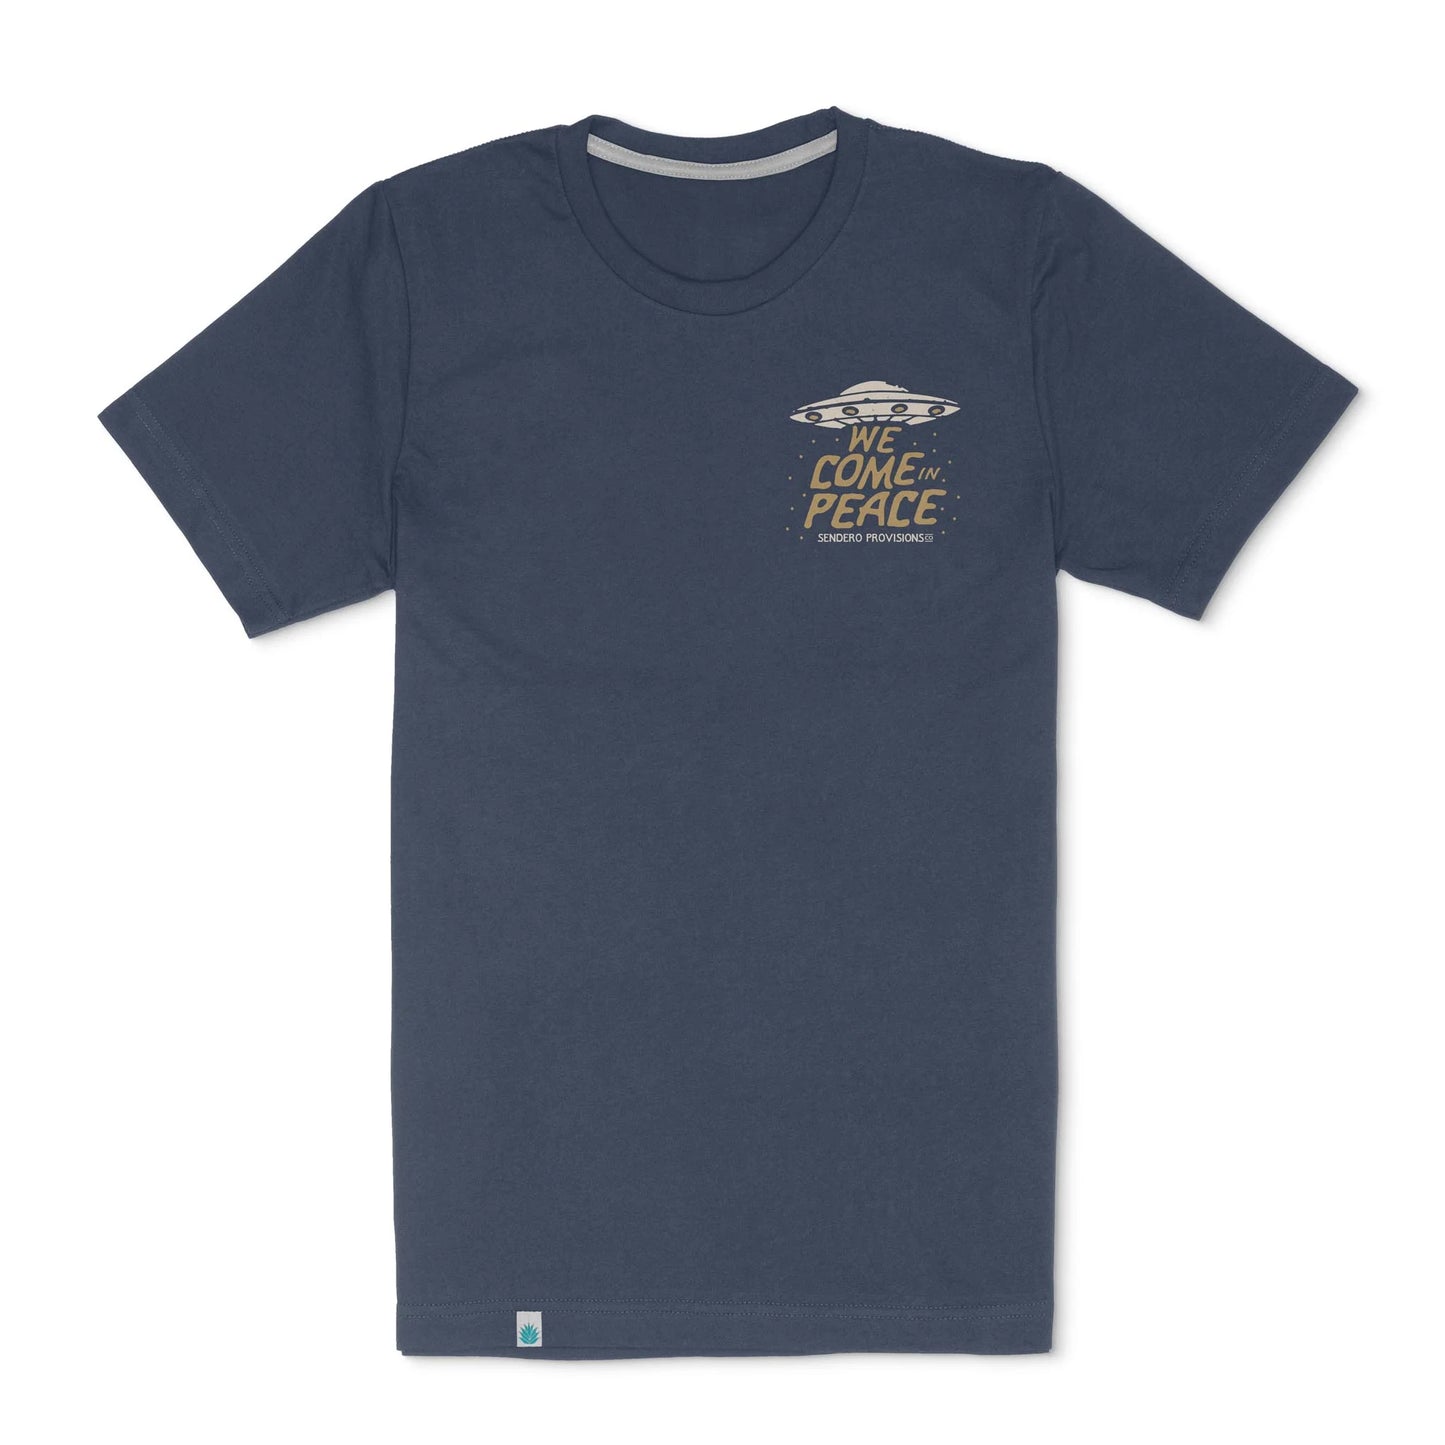 Fast Horse Graphic Men's T-Shirt at 6Whiskey six whisky fall white short sleeve sendero provisions we come in peace